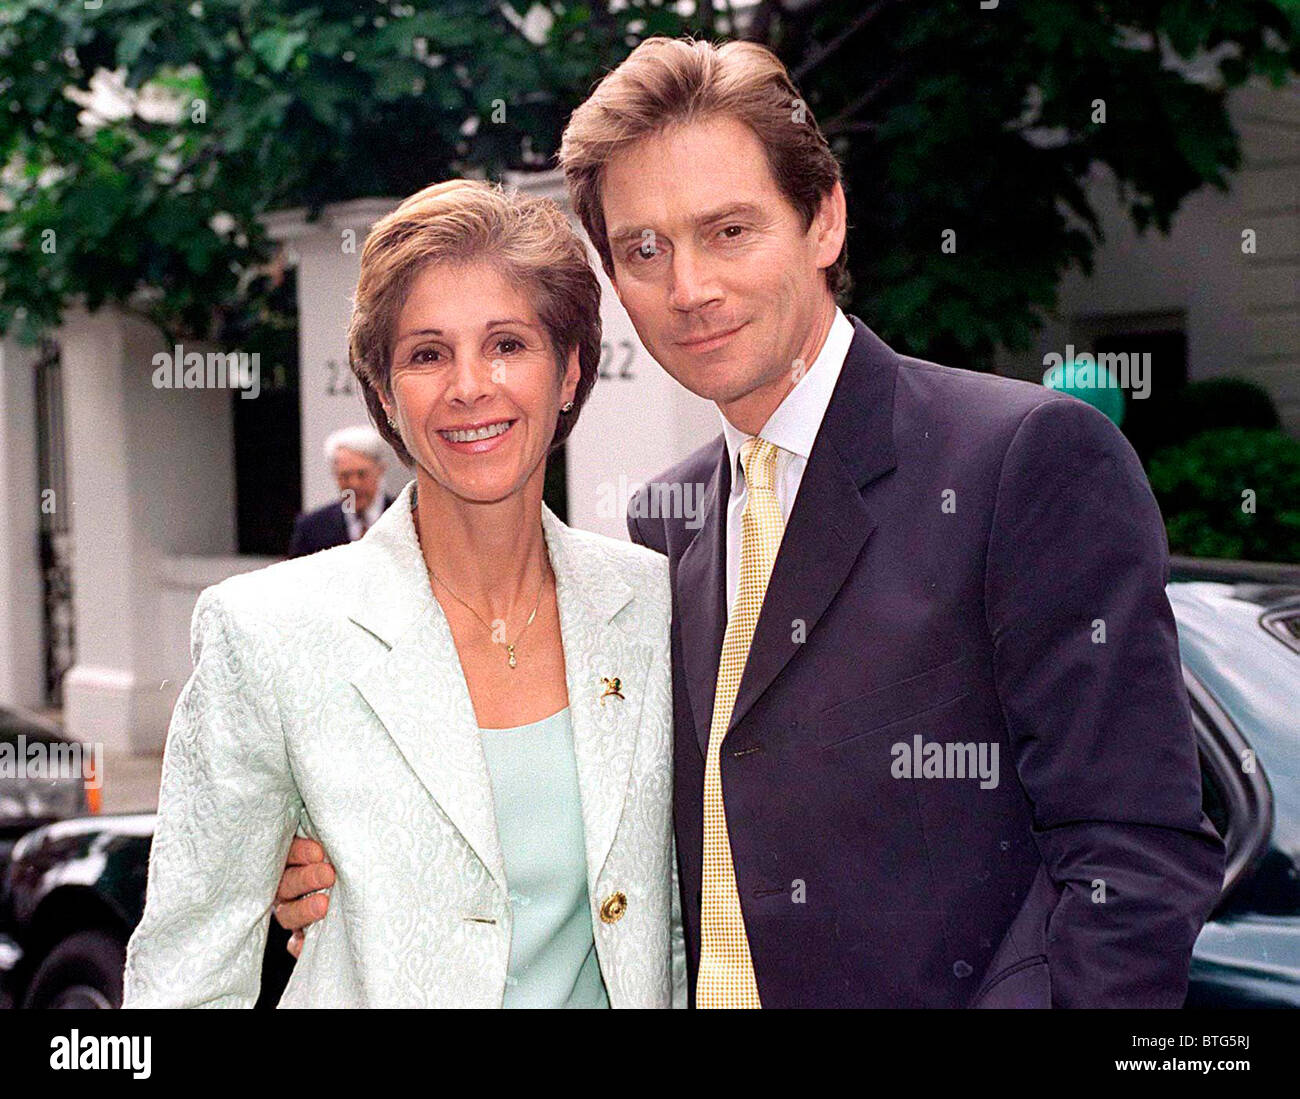 ACTOR ANTHONY ANDREWS AND WIFE GEORGINA ATTENDING DAVID FROST'S SUMMER PARTY IN CARLYLE SQUARE, Chelsea Stock Photo